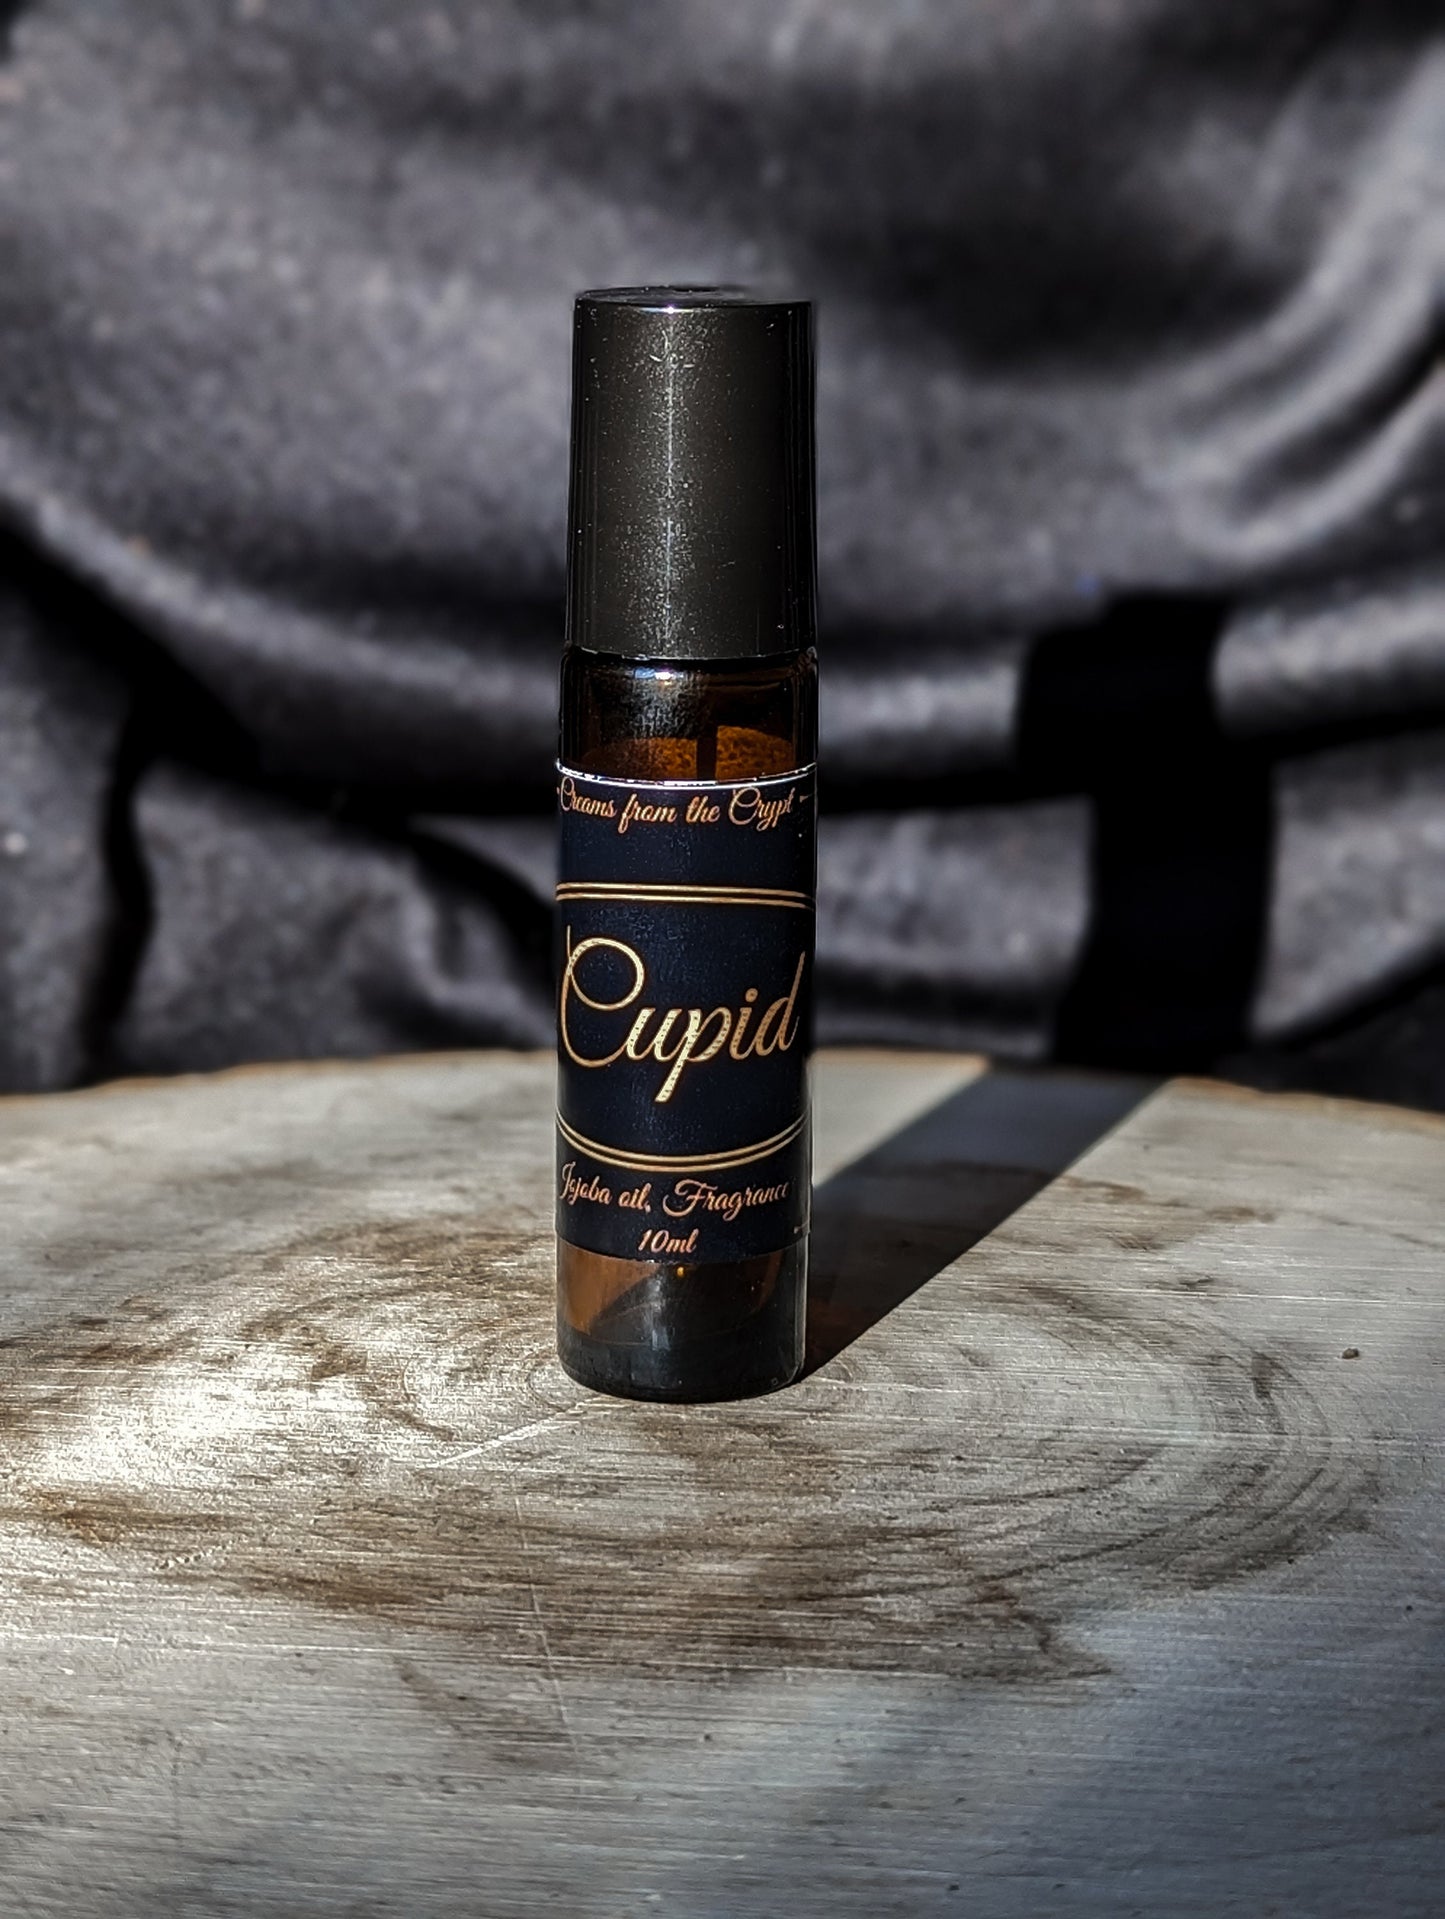 CUPID - White chocolate raspberry perfume oil, fragrance, eau de toilette, roll on, jojoba oil, witchy gift, gothic, rollerball, Valentine's